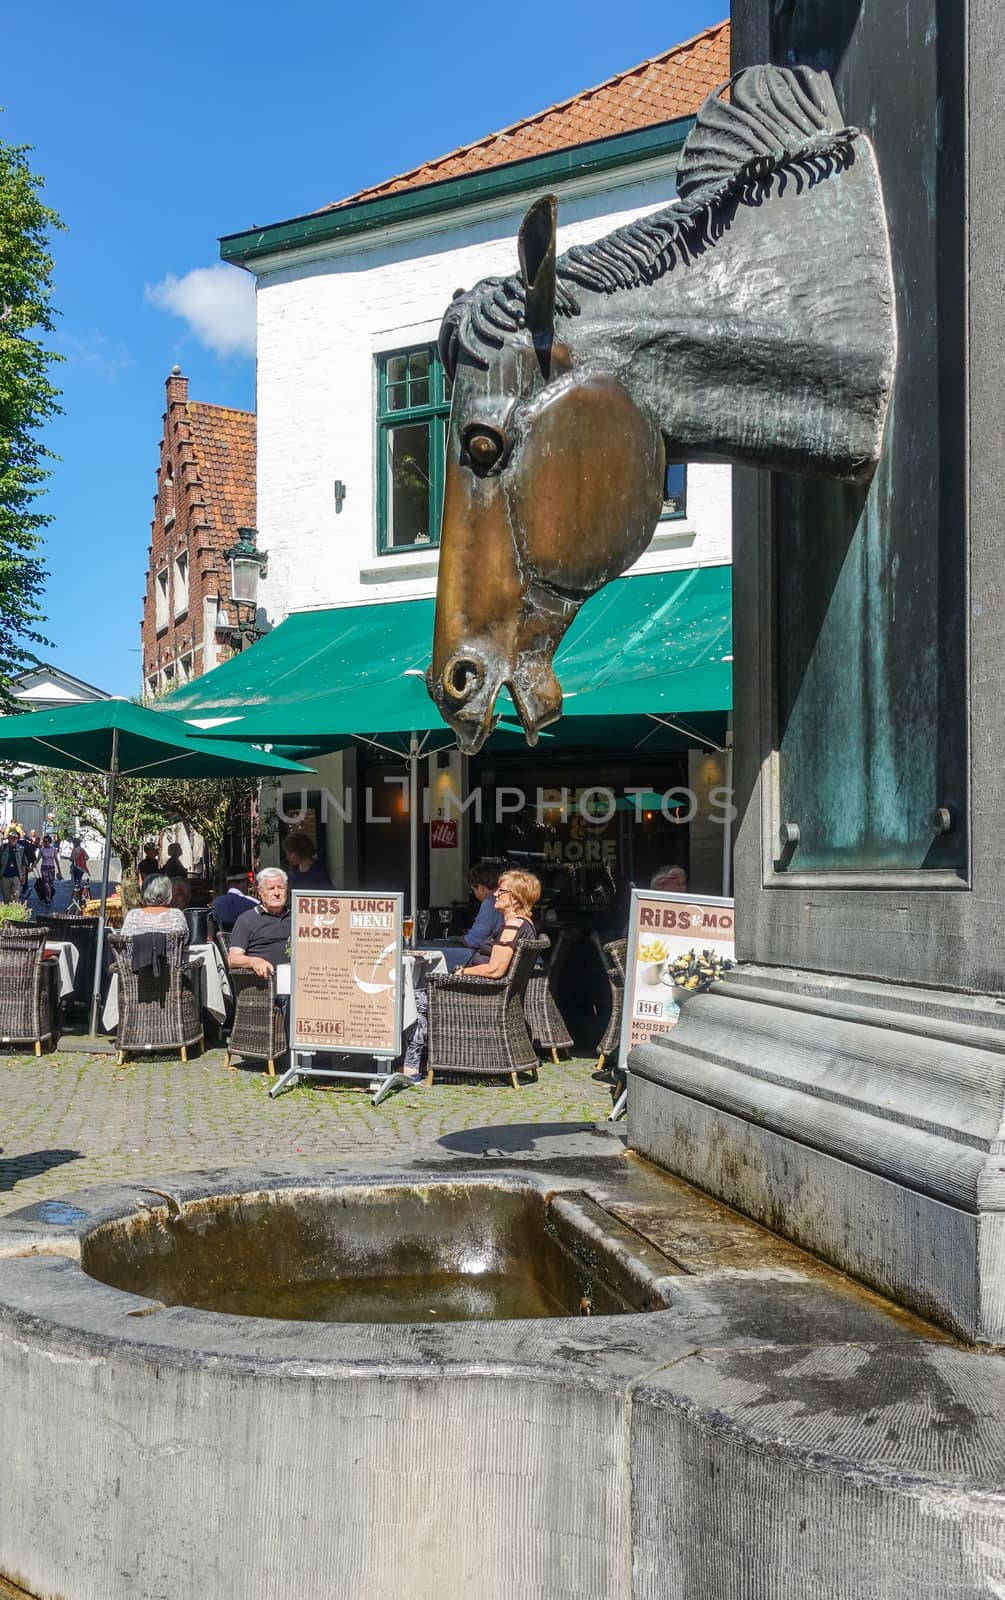 Bruges, Flanders, Belgium -  June 17, 2019: Gray stone water pump with horse head as faucet especially for horses of carriages near beguinage. People eating in restaurant.